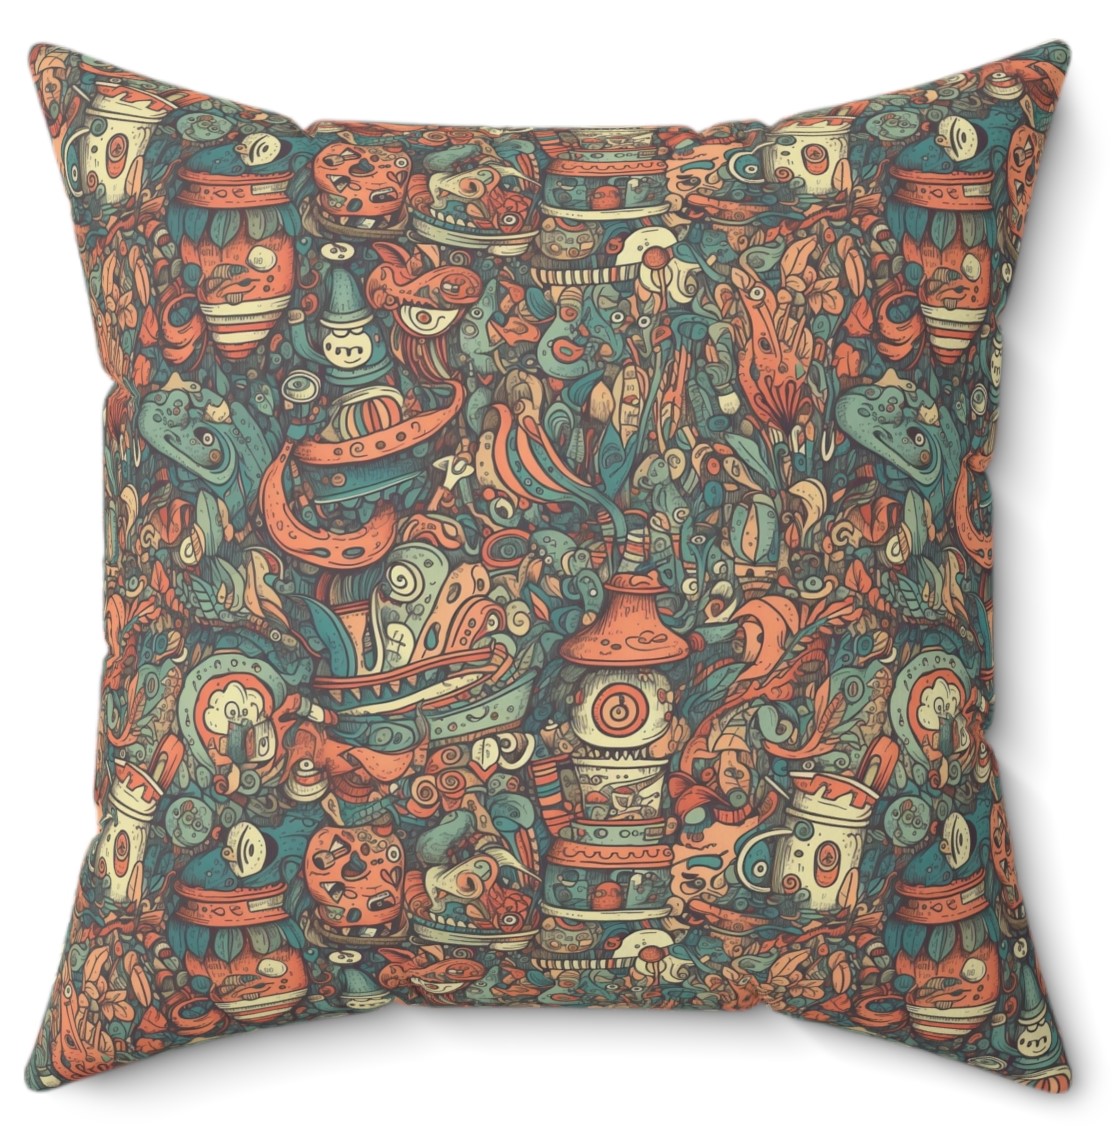 Whimsical Twist Colorful Doodles Print Pillow